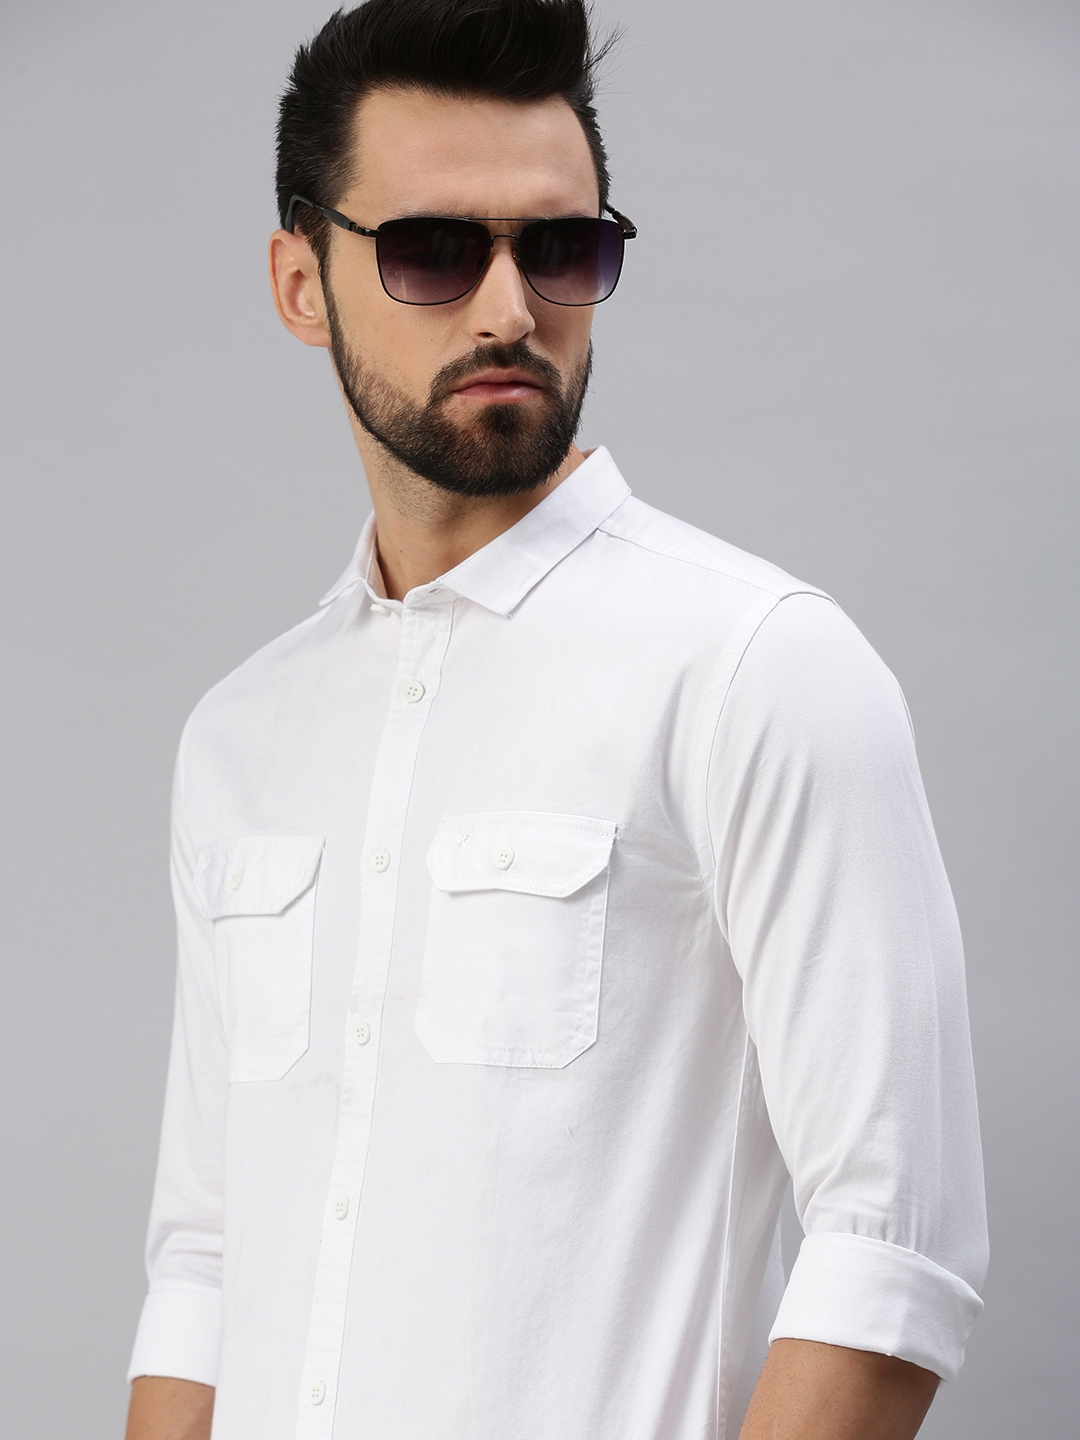 Men's White Cotton Solid Casual Shirts